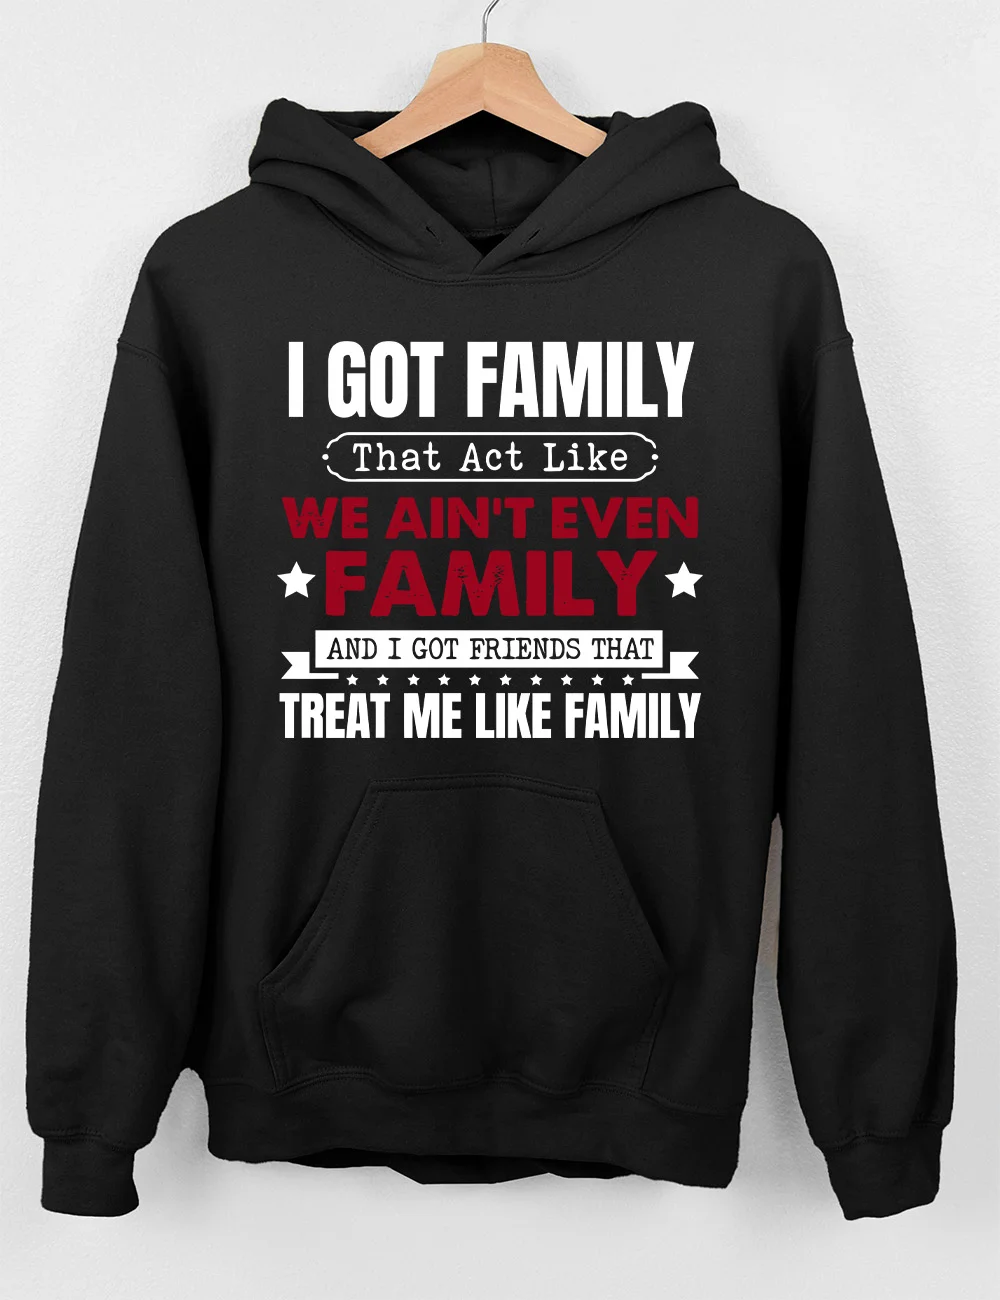 I Got Family That Act Like We Ain't Even Family Hoodie